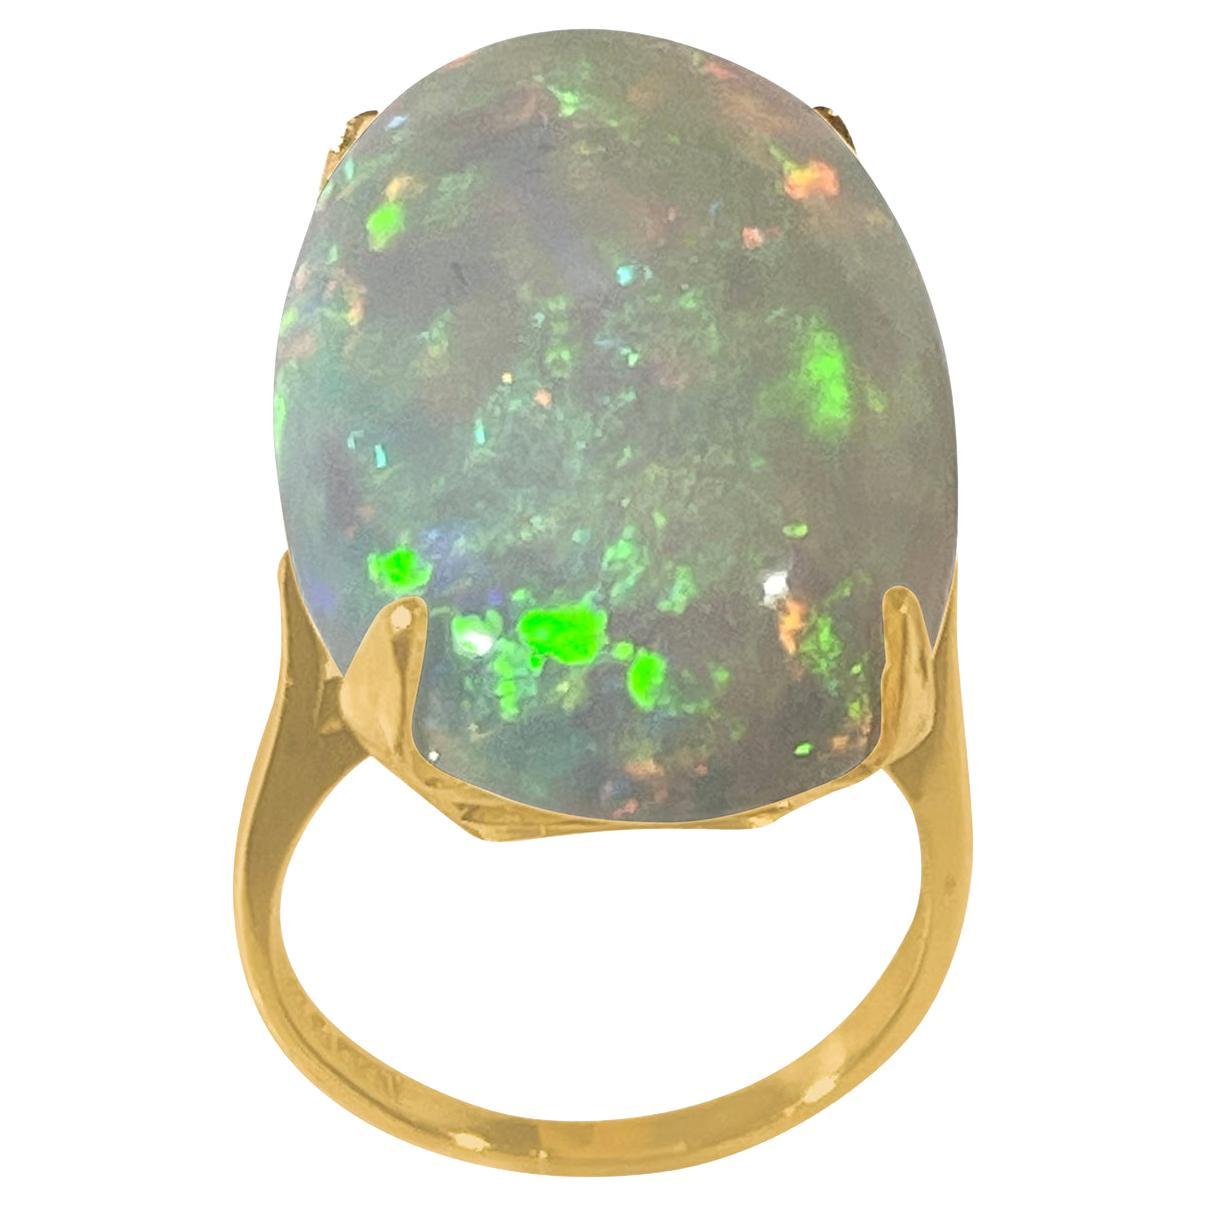 approximately 14 Carat Oval Shape Ethiopian Opal Cocktail Ring 14 Karat Yellow Gold  Ring size 5.5
Oval  Natural Opal  A classic, Cocktail ring 
14 Karat Yellow Gold Estate
Size of the opal 17 X 26 MM, Approximately 14 Ct
Amazing colors in this opal